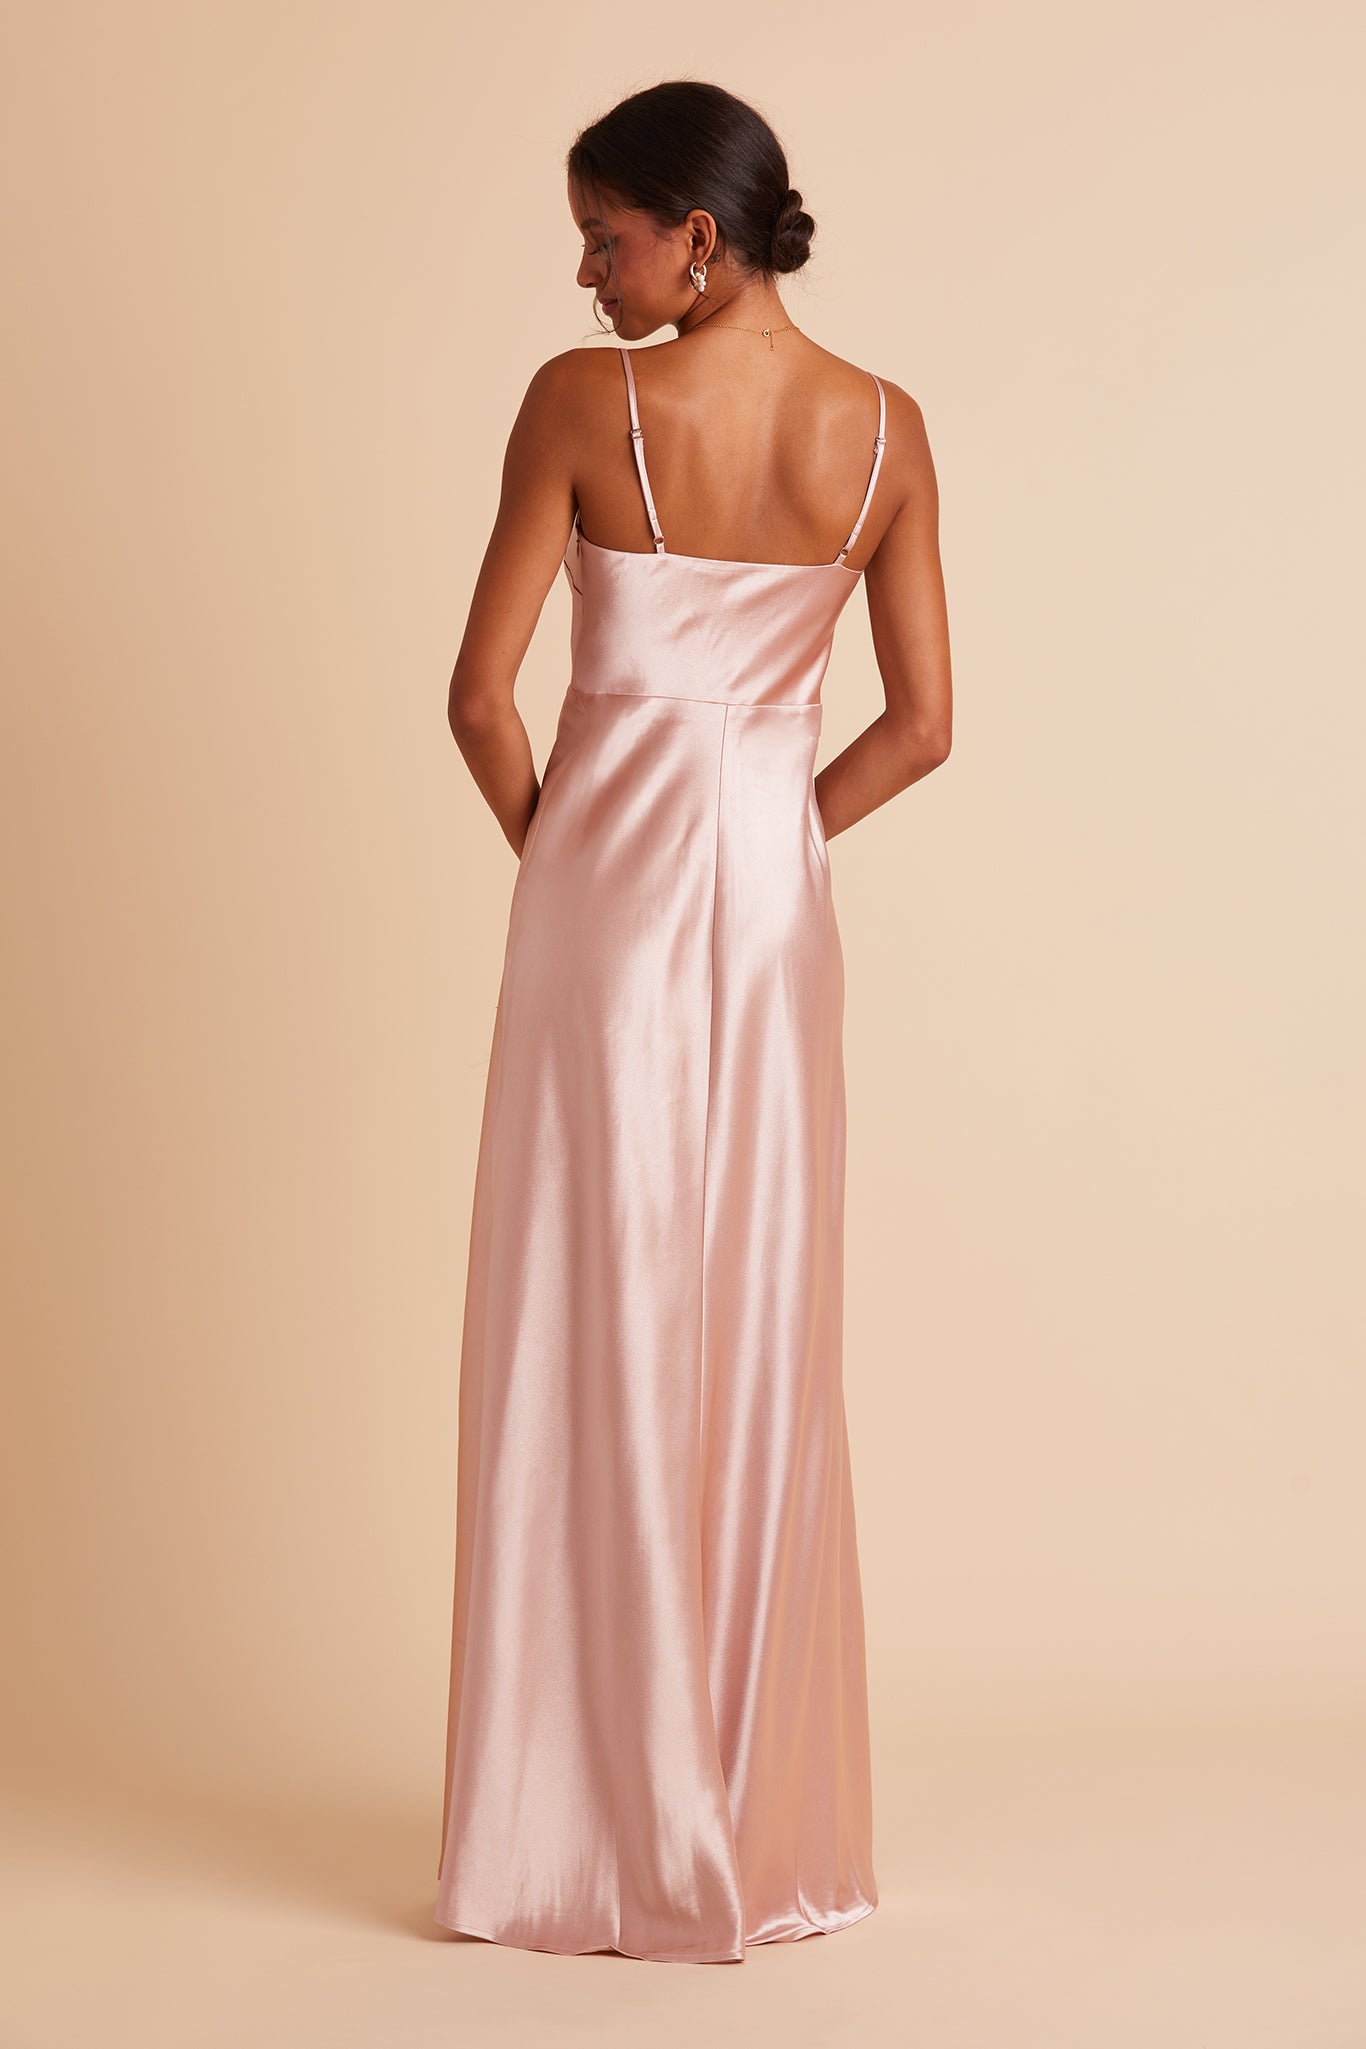 Back view of the Lisa Long Dress in rose gold satin shows the back of the dress with adjustable spaghetti straps and a smooth fit in the bodice and waist that attach to a full length skirt.  